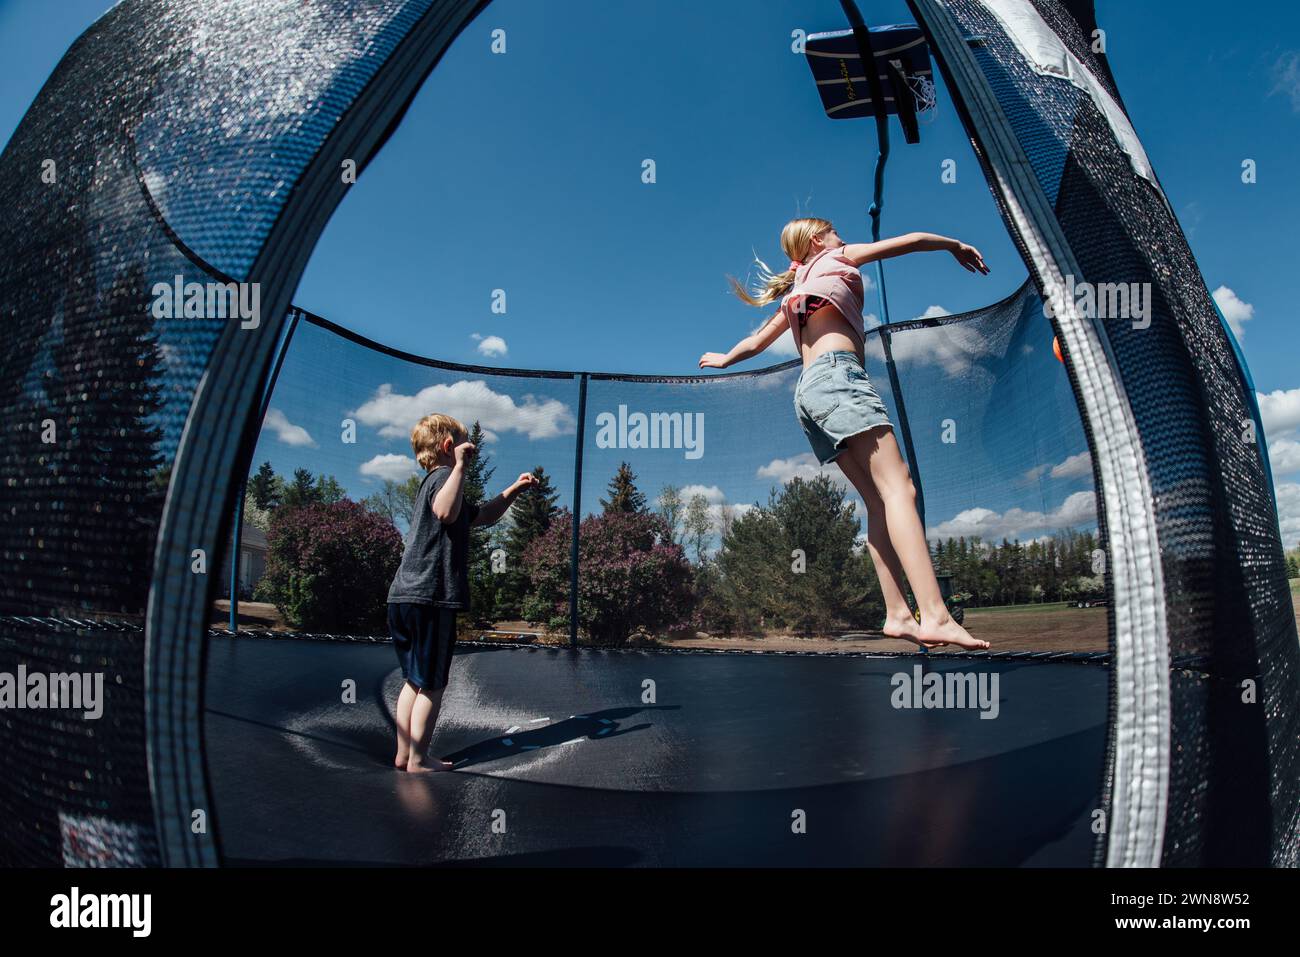 Two children jump on trampoline in summer outdoors. Stock Photo